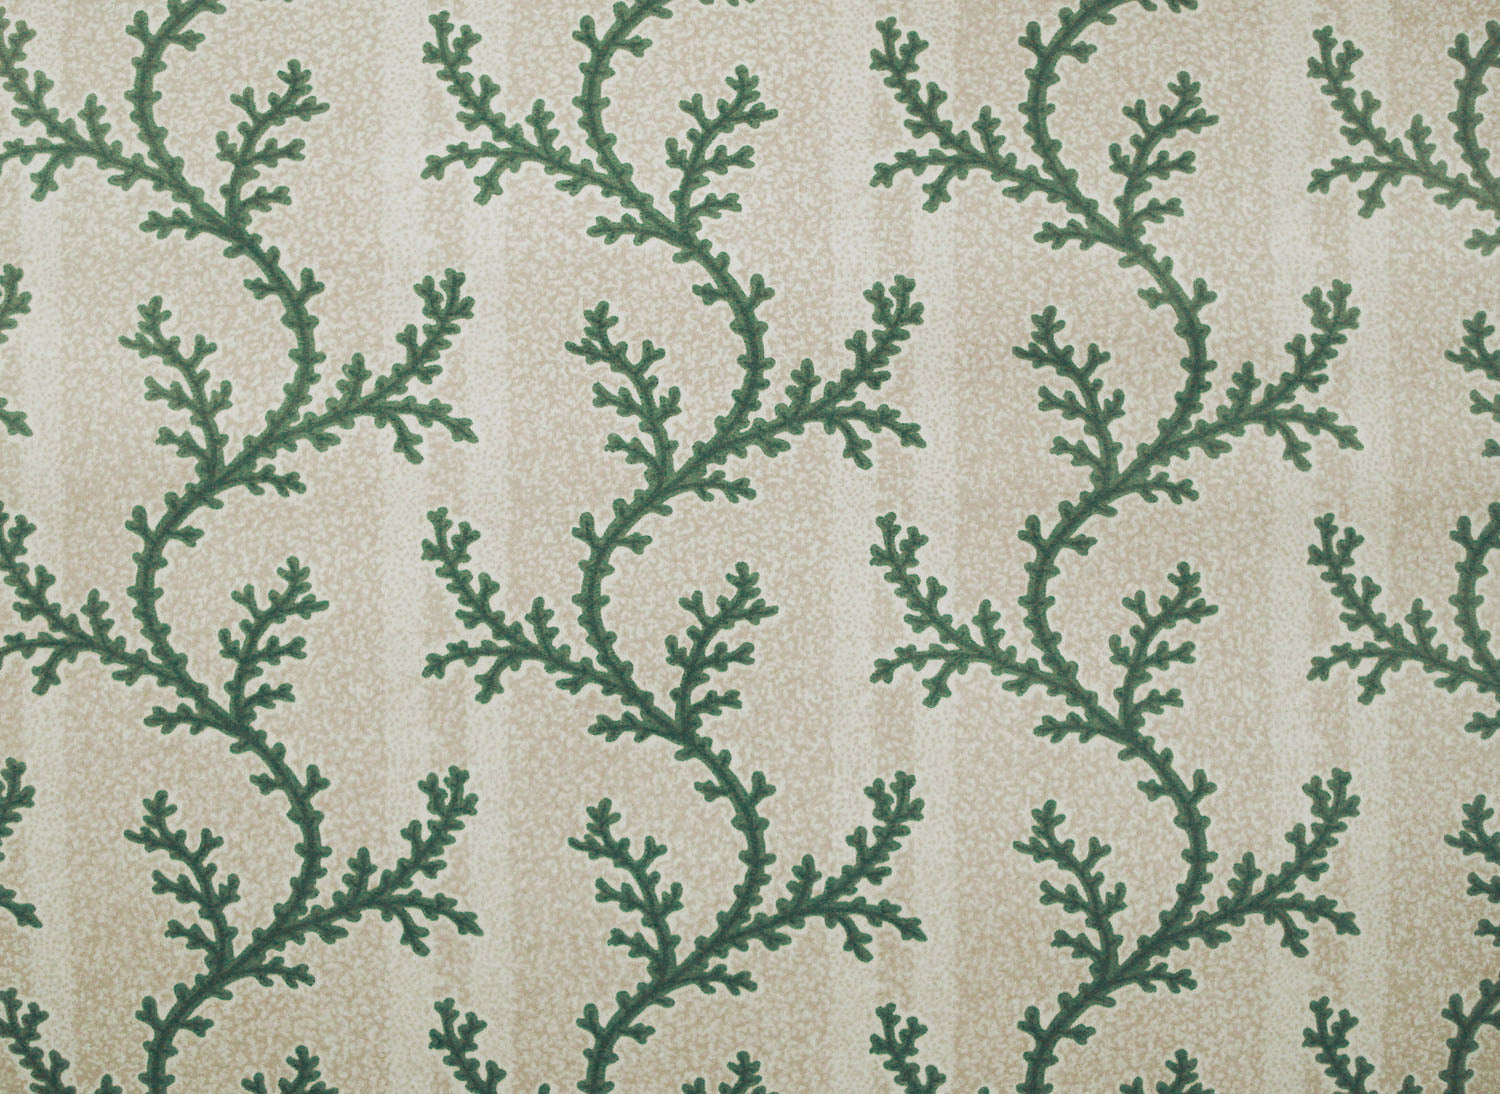 cotton fabric printed with a thin branching green coral